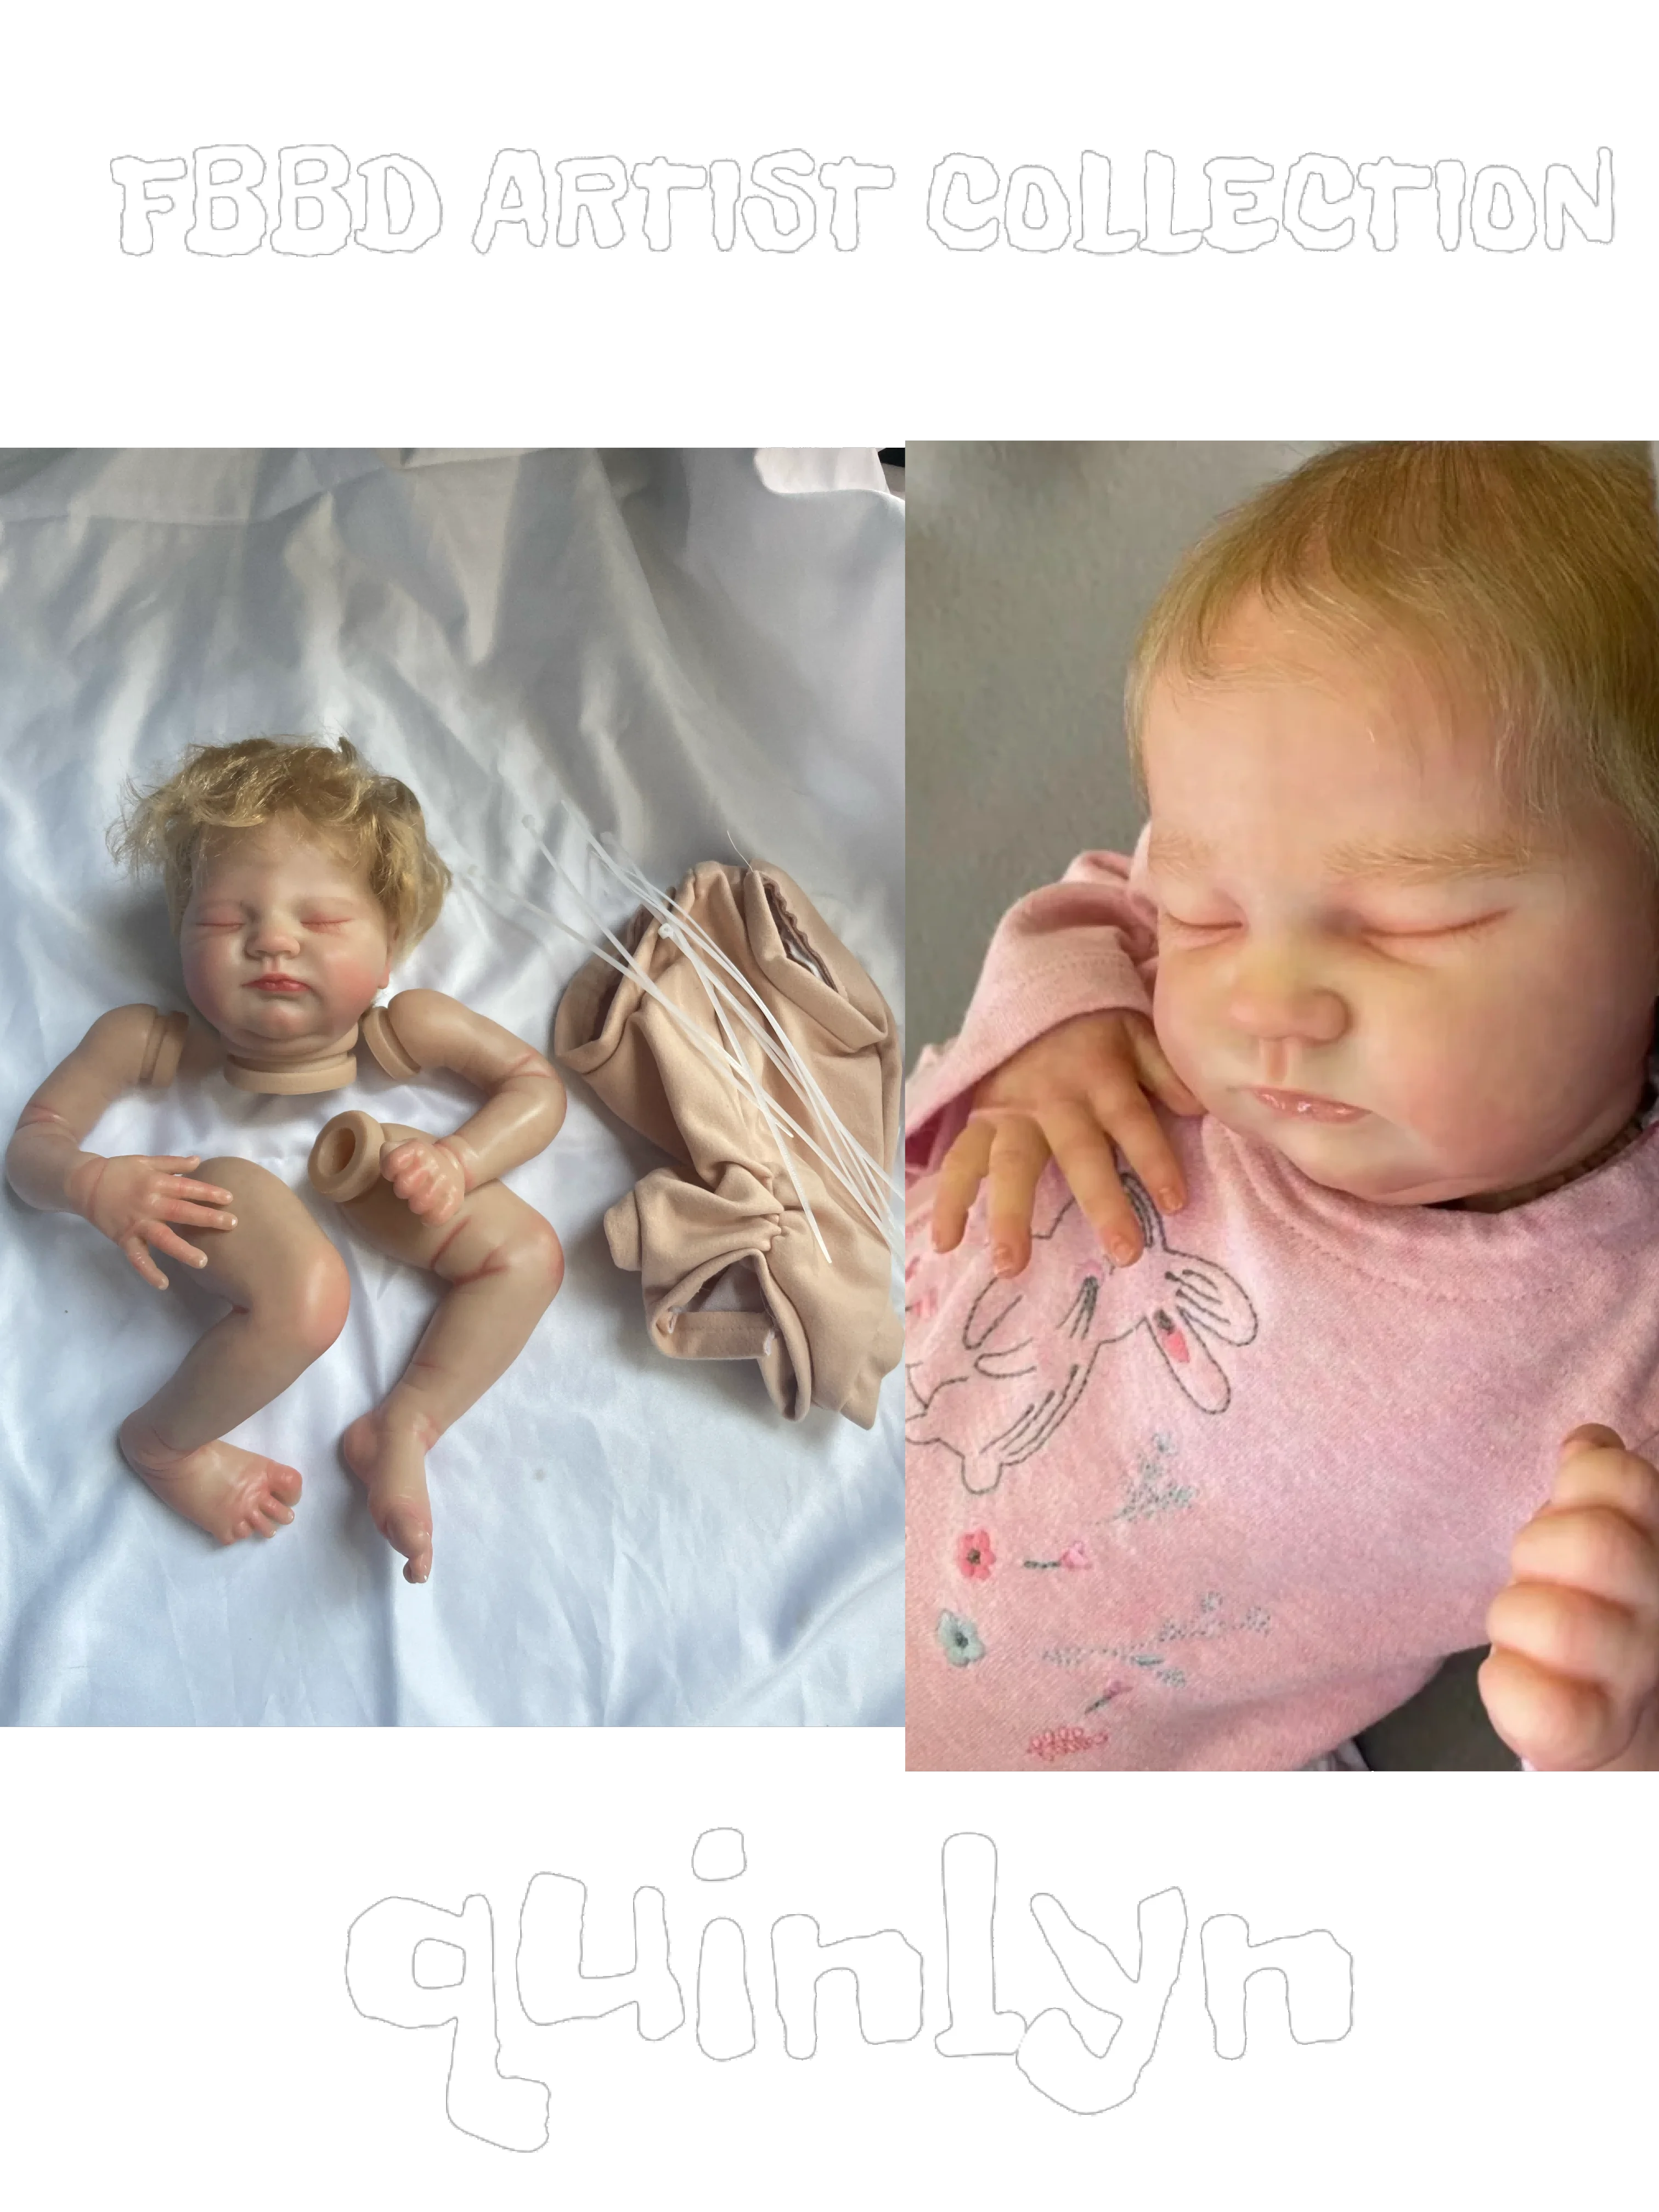 Quinlyn 20inch Bebe Reborn Painted Kit By FBBD Artist Unassembled Kit With Veins Lifelike With Hand-Rooted Hair Dolls For Girl fbbd 19 already painted bebe reborn twin a genesis painting 100%hand made with veins lifelike soft touch dolls for children